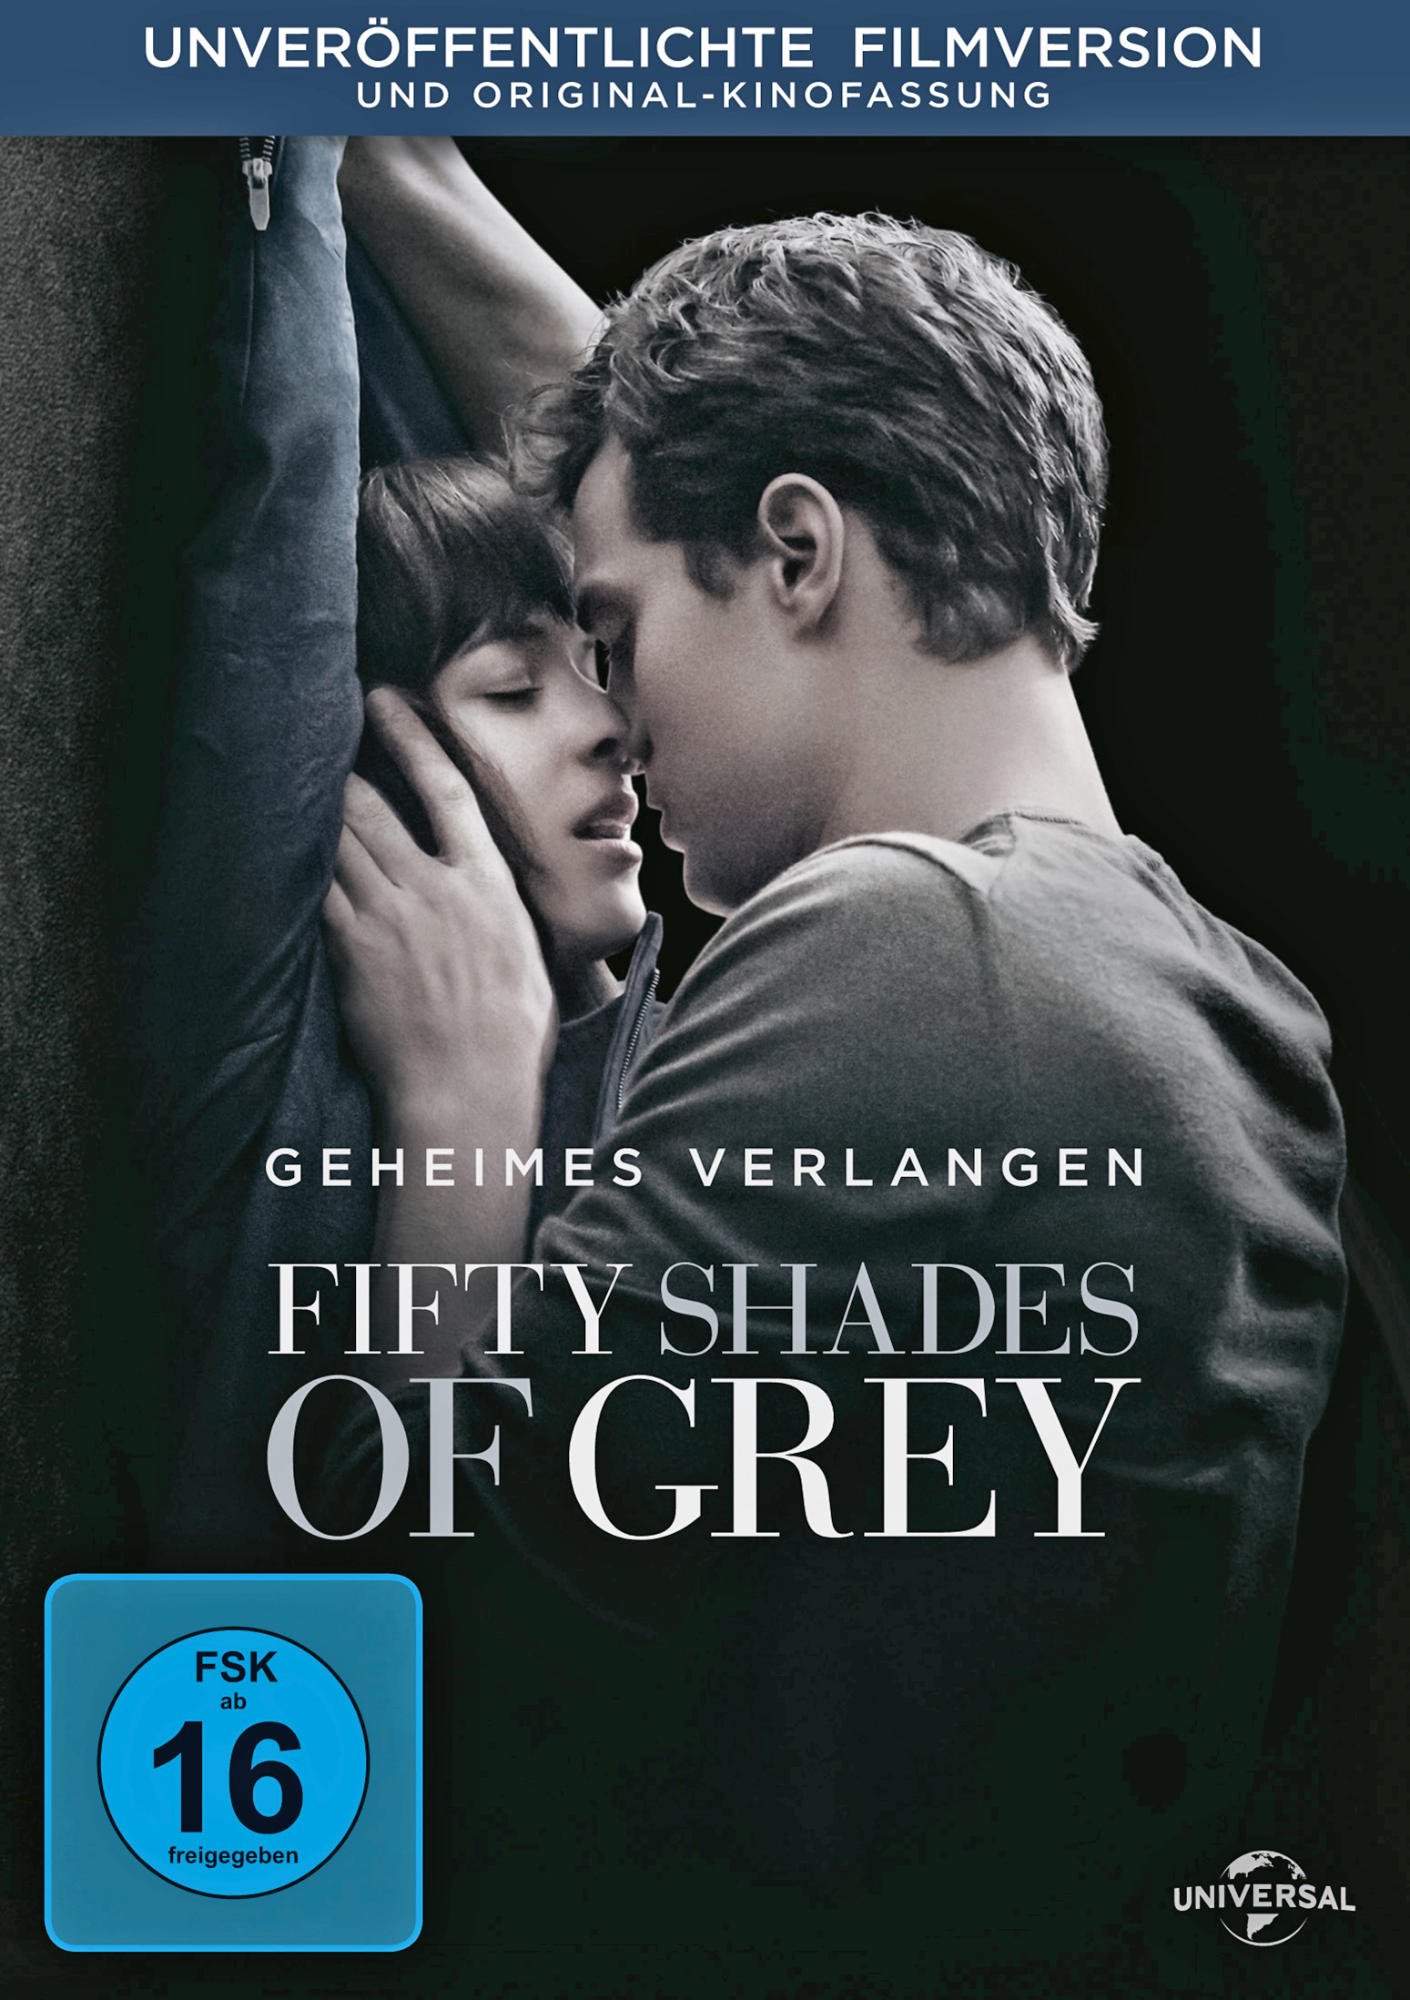 Fifty Of Grey DVD Shades